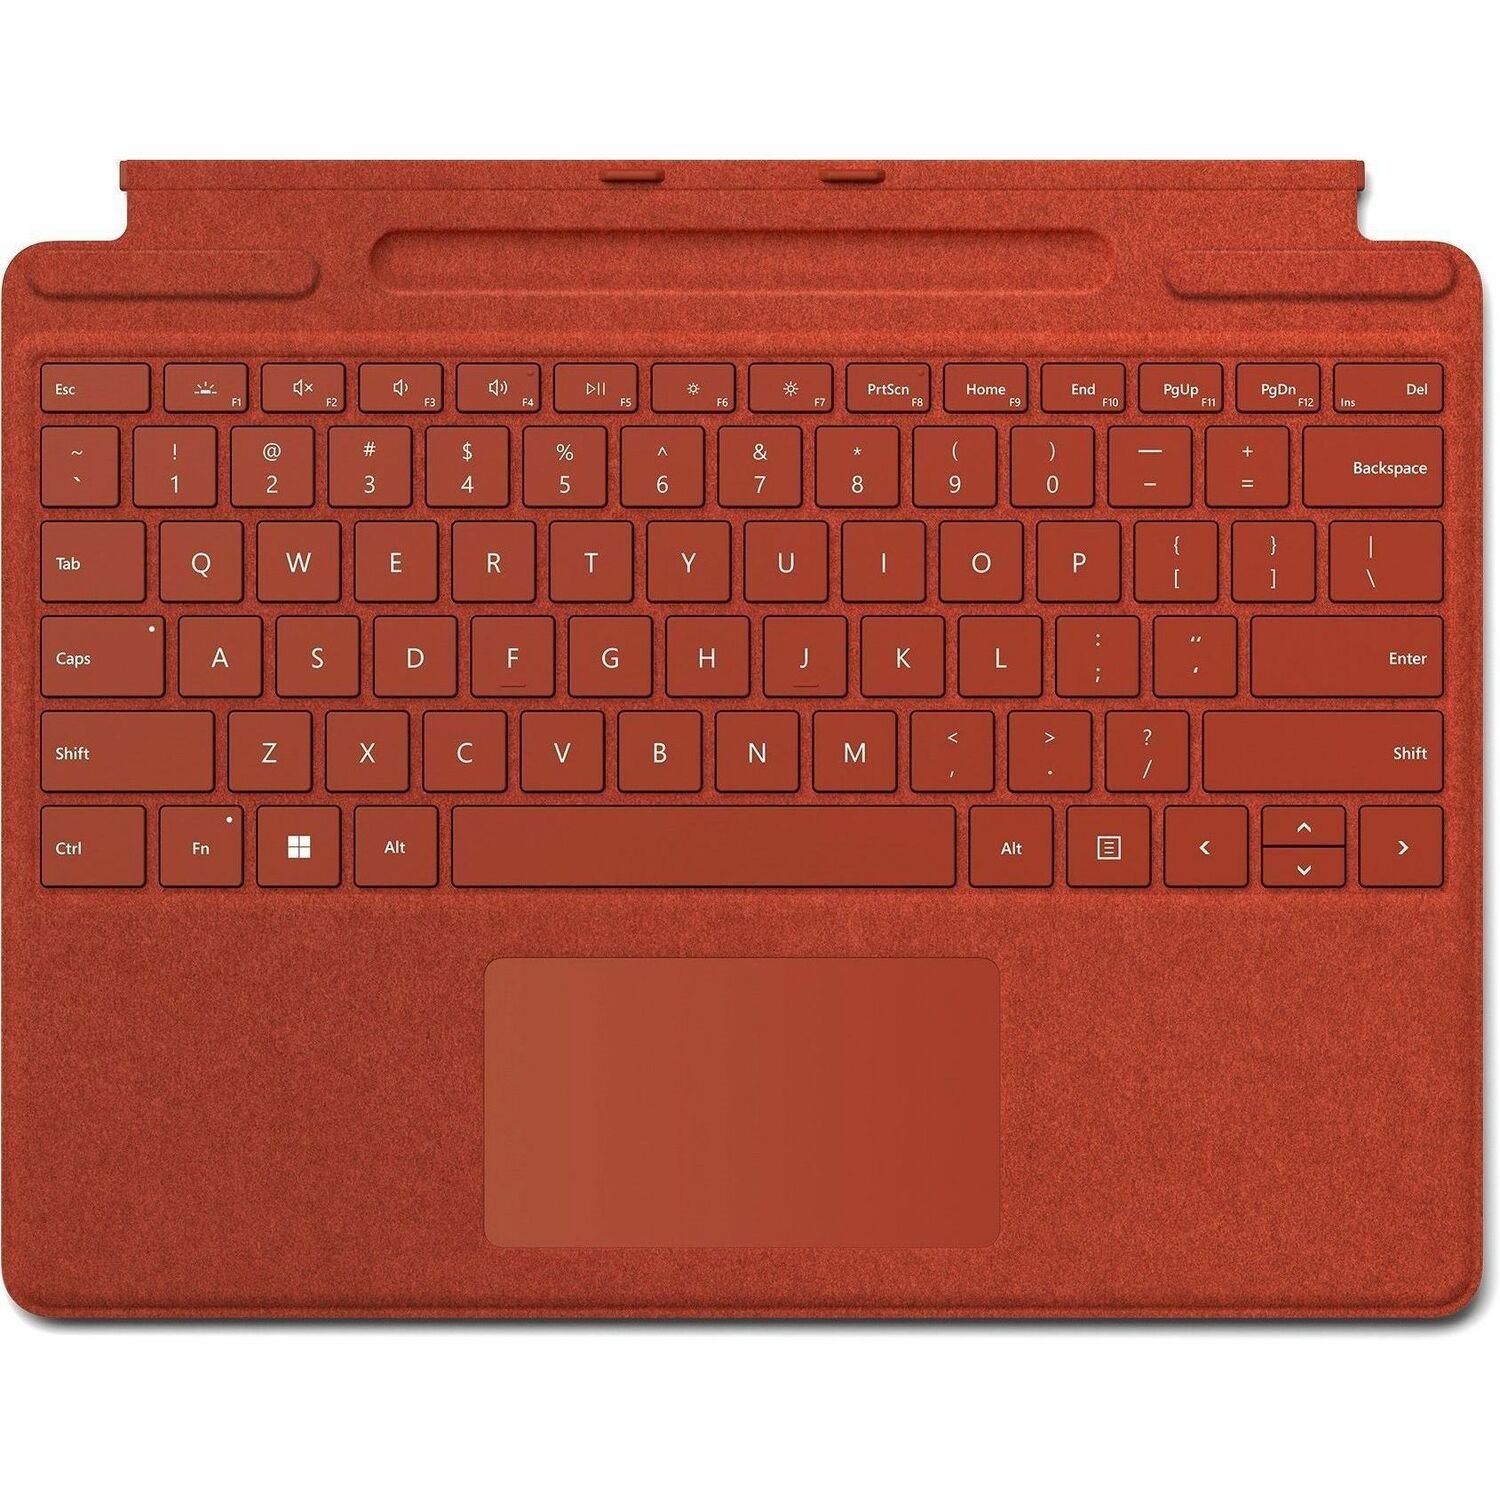 Microsoft Signature Keyboard/Cover Case Microsoft Surface Pro 3, Surface Pro 4, Surface Pro 6, Surface Pro 8, Surface Pro 9, Surface Pro X Tablet, Stylus - Poppy Red